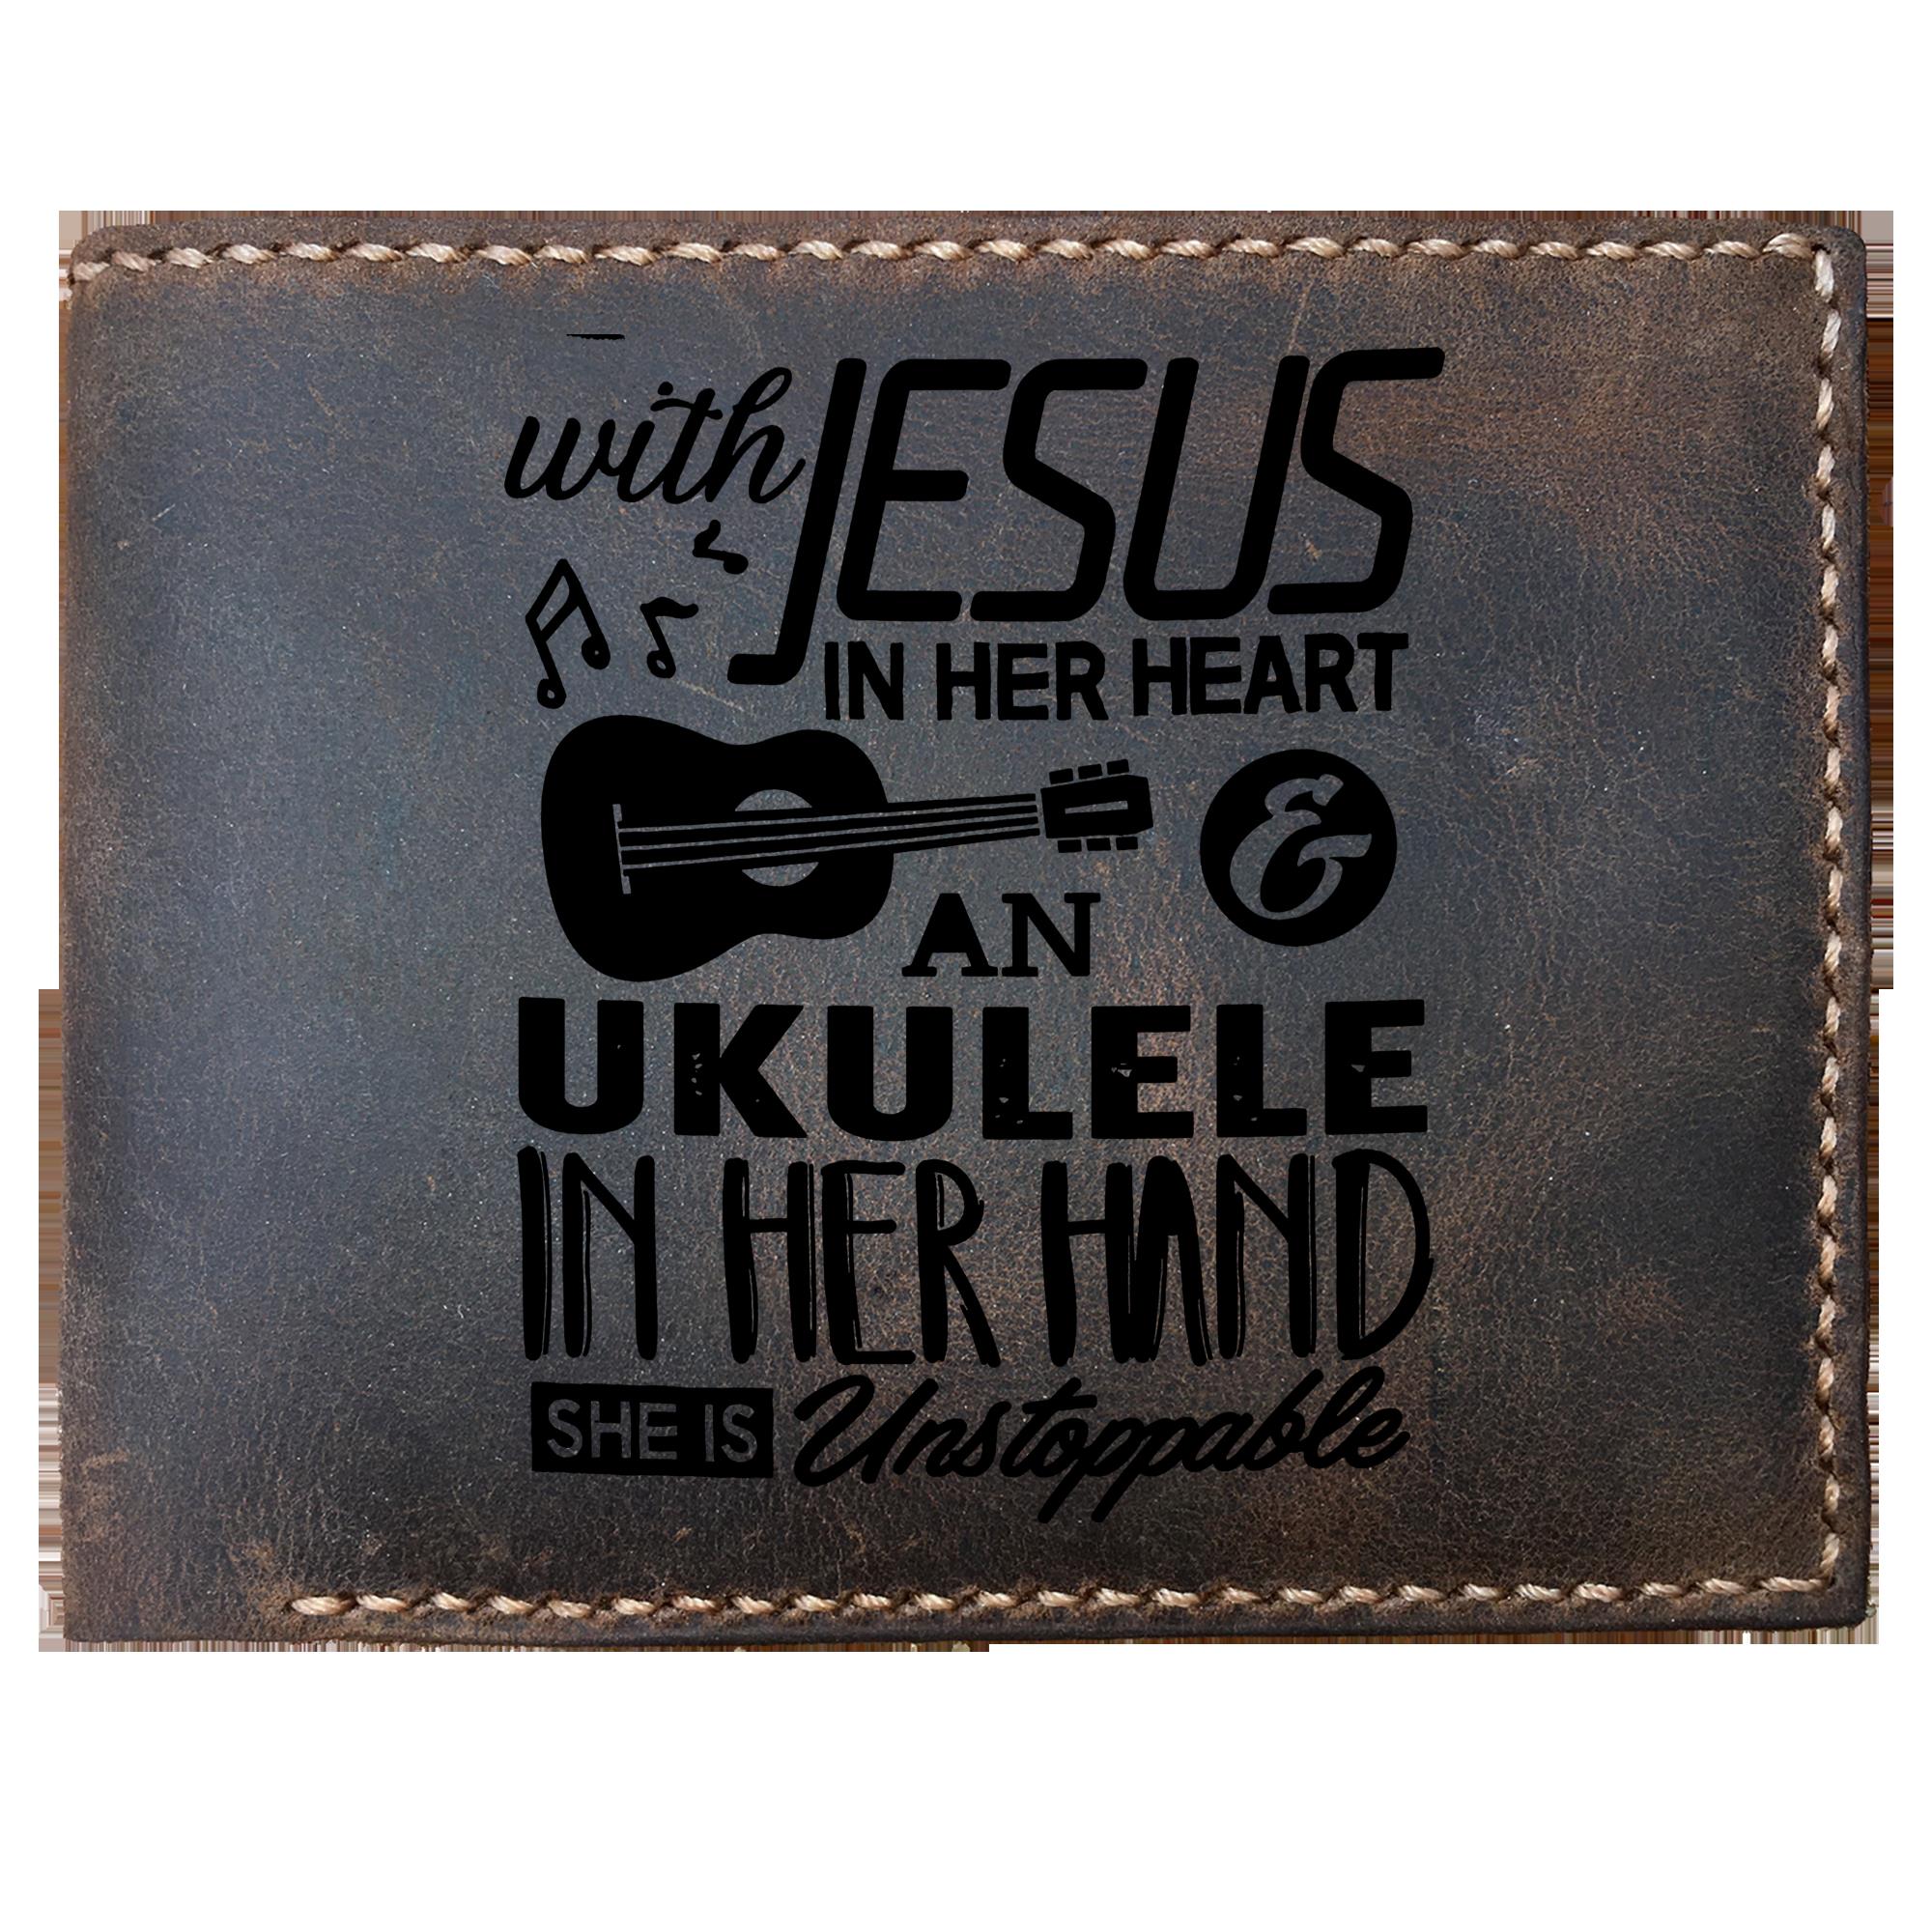 Skitongifts Funny Custom Engraved Bifold Leather Wallet, With Jesus In Heart Ukulele In Hand Marching Band Ukulele Player For Teacher Students